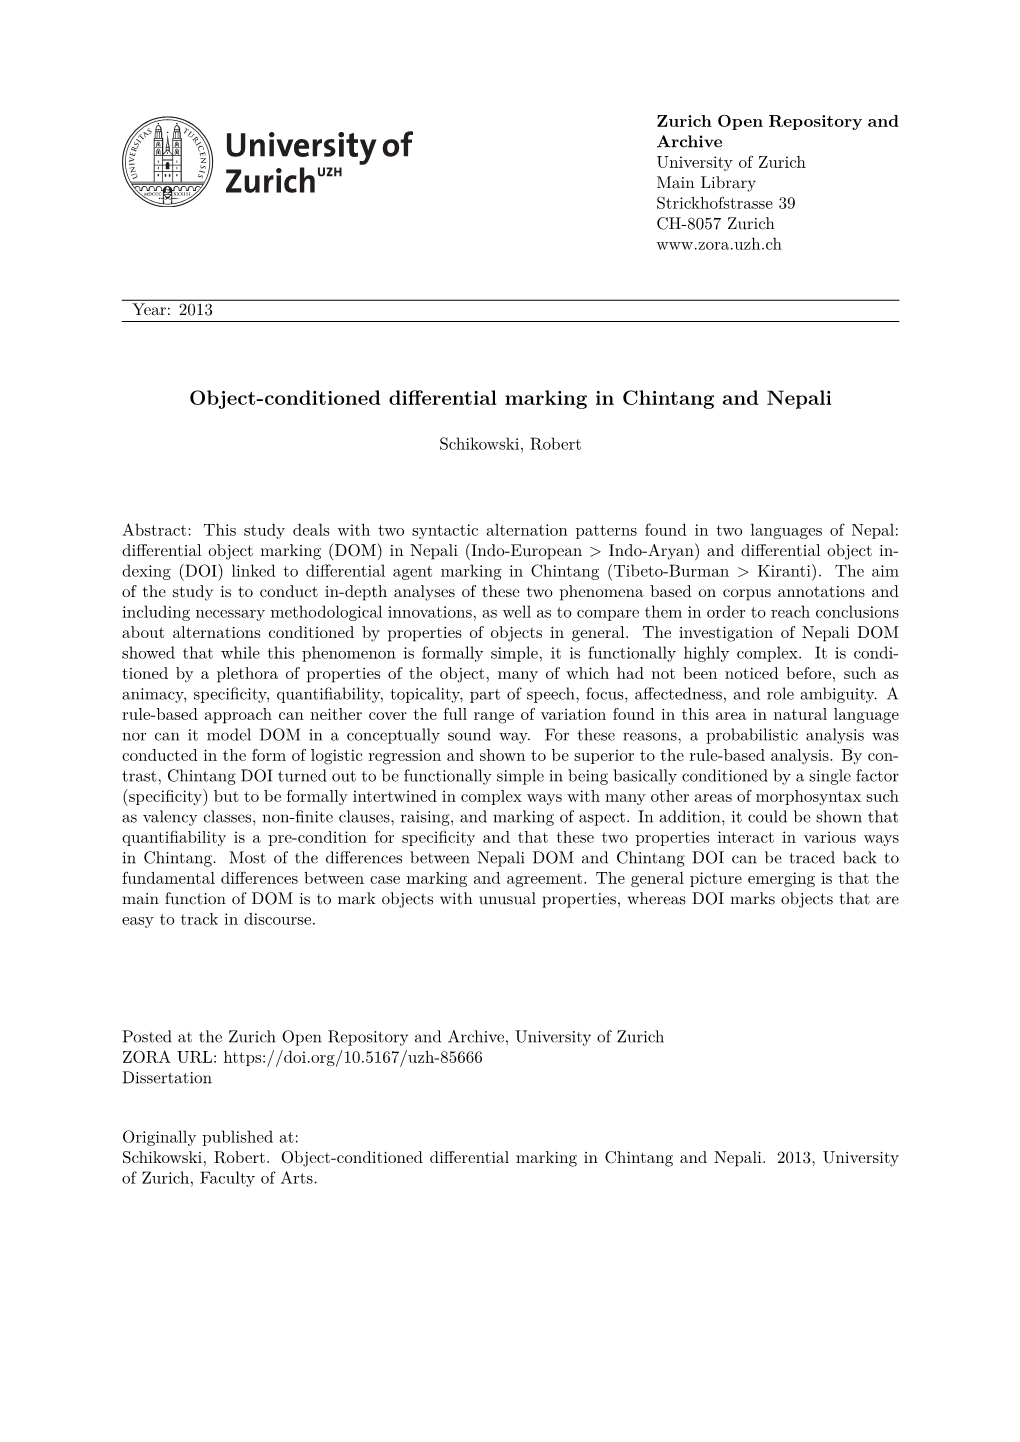 Object-Conditioned Differential Marking in Chintang and Nepali